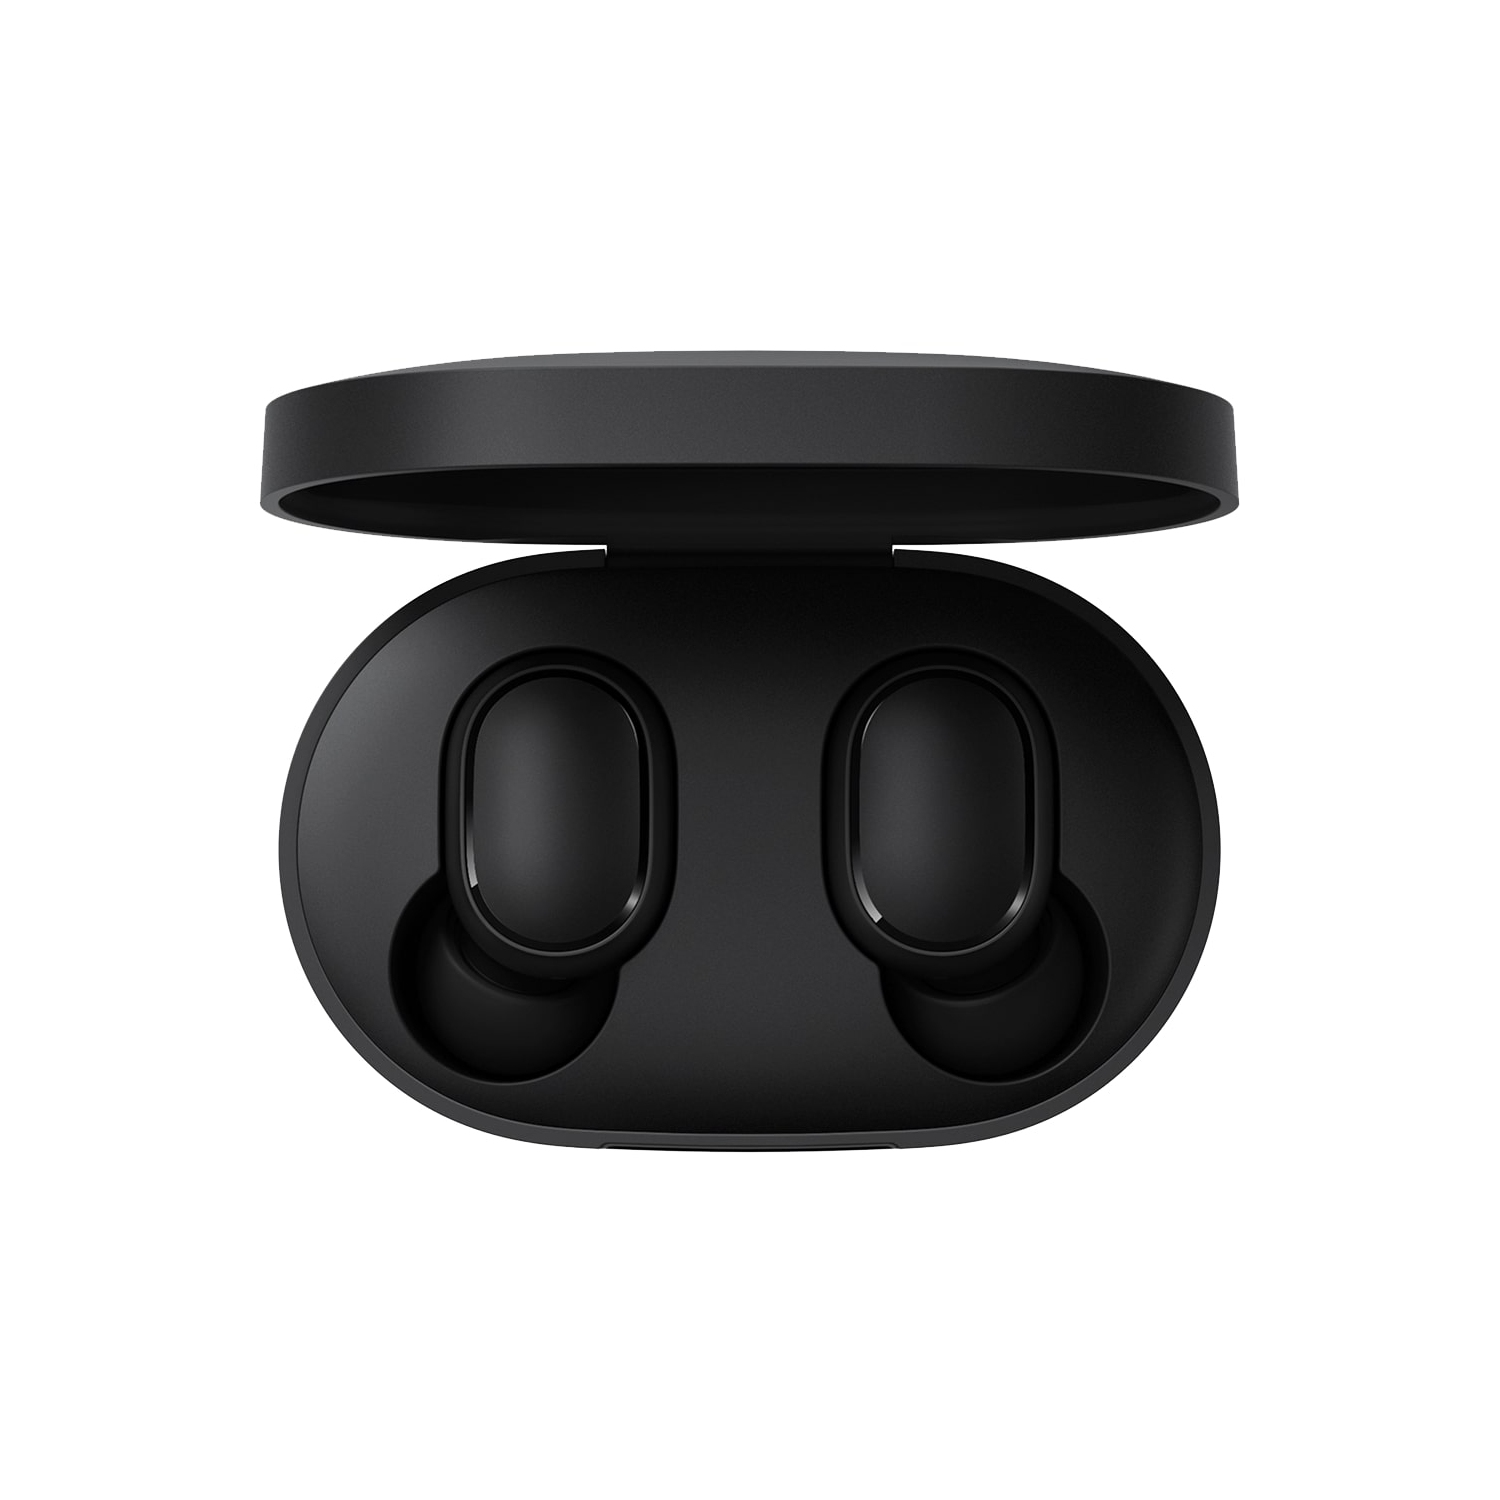 Xiaomi Mi True Wireless Earbuds Basic 2, 12 hours of Battery, Switch Between Single-ear and Double-ear, Compatible with iPhone, Samsung and Android, High Performance Touch Control, Bluetooth 5.0